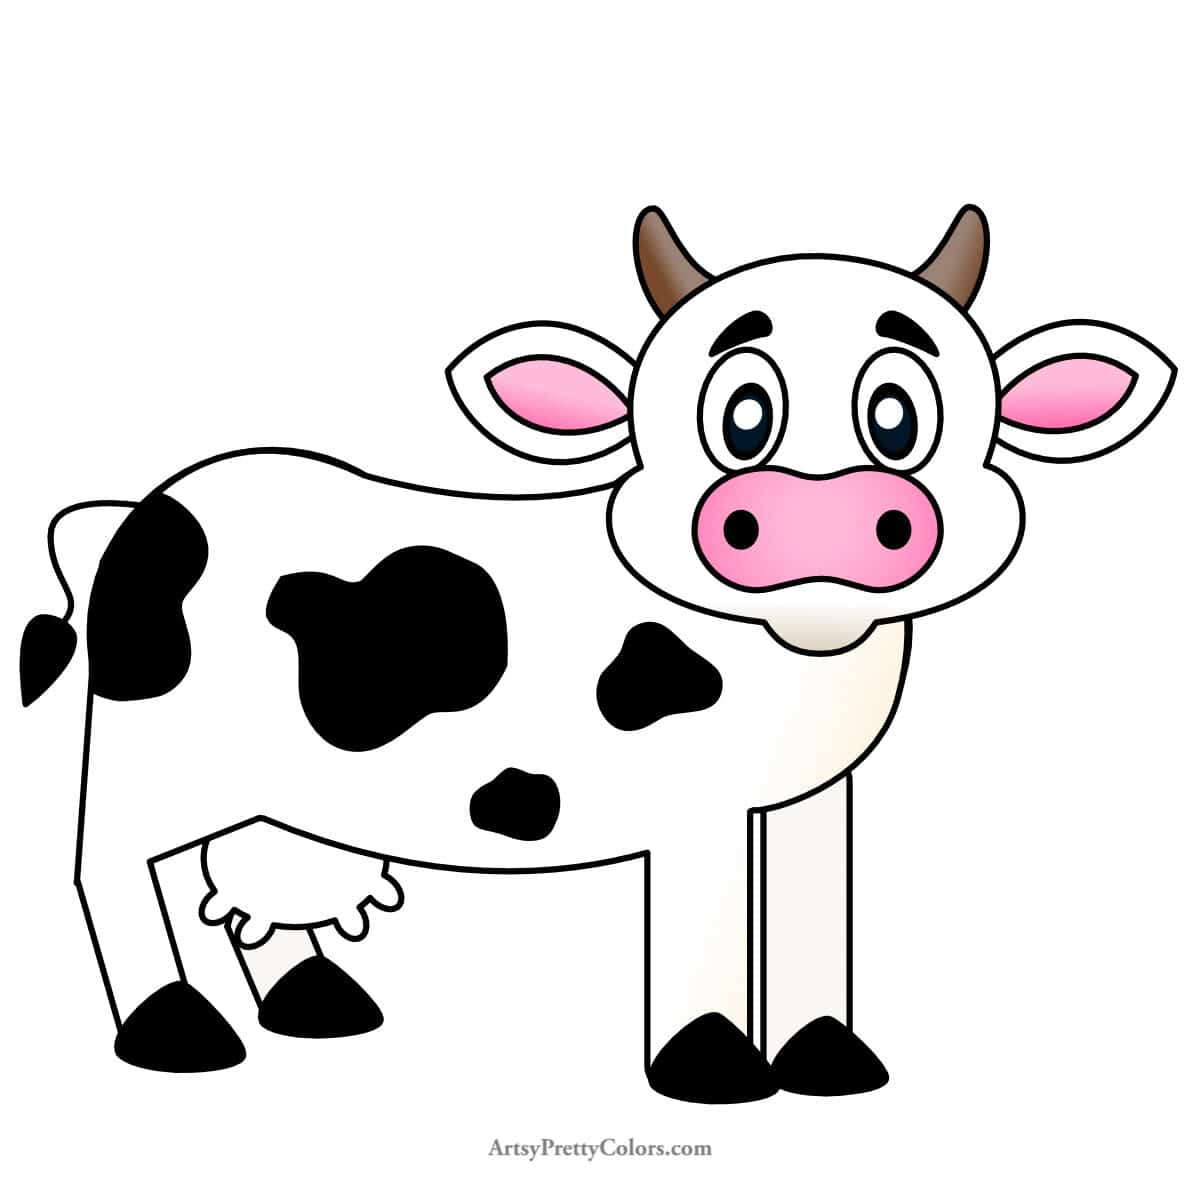 a drawing of a cute cow with a pink nose and ears and black spots